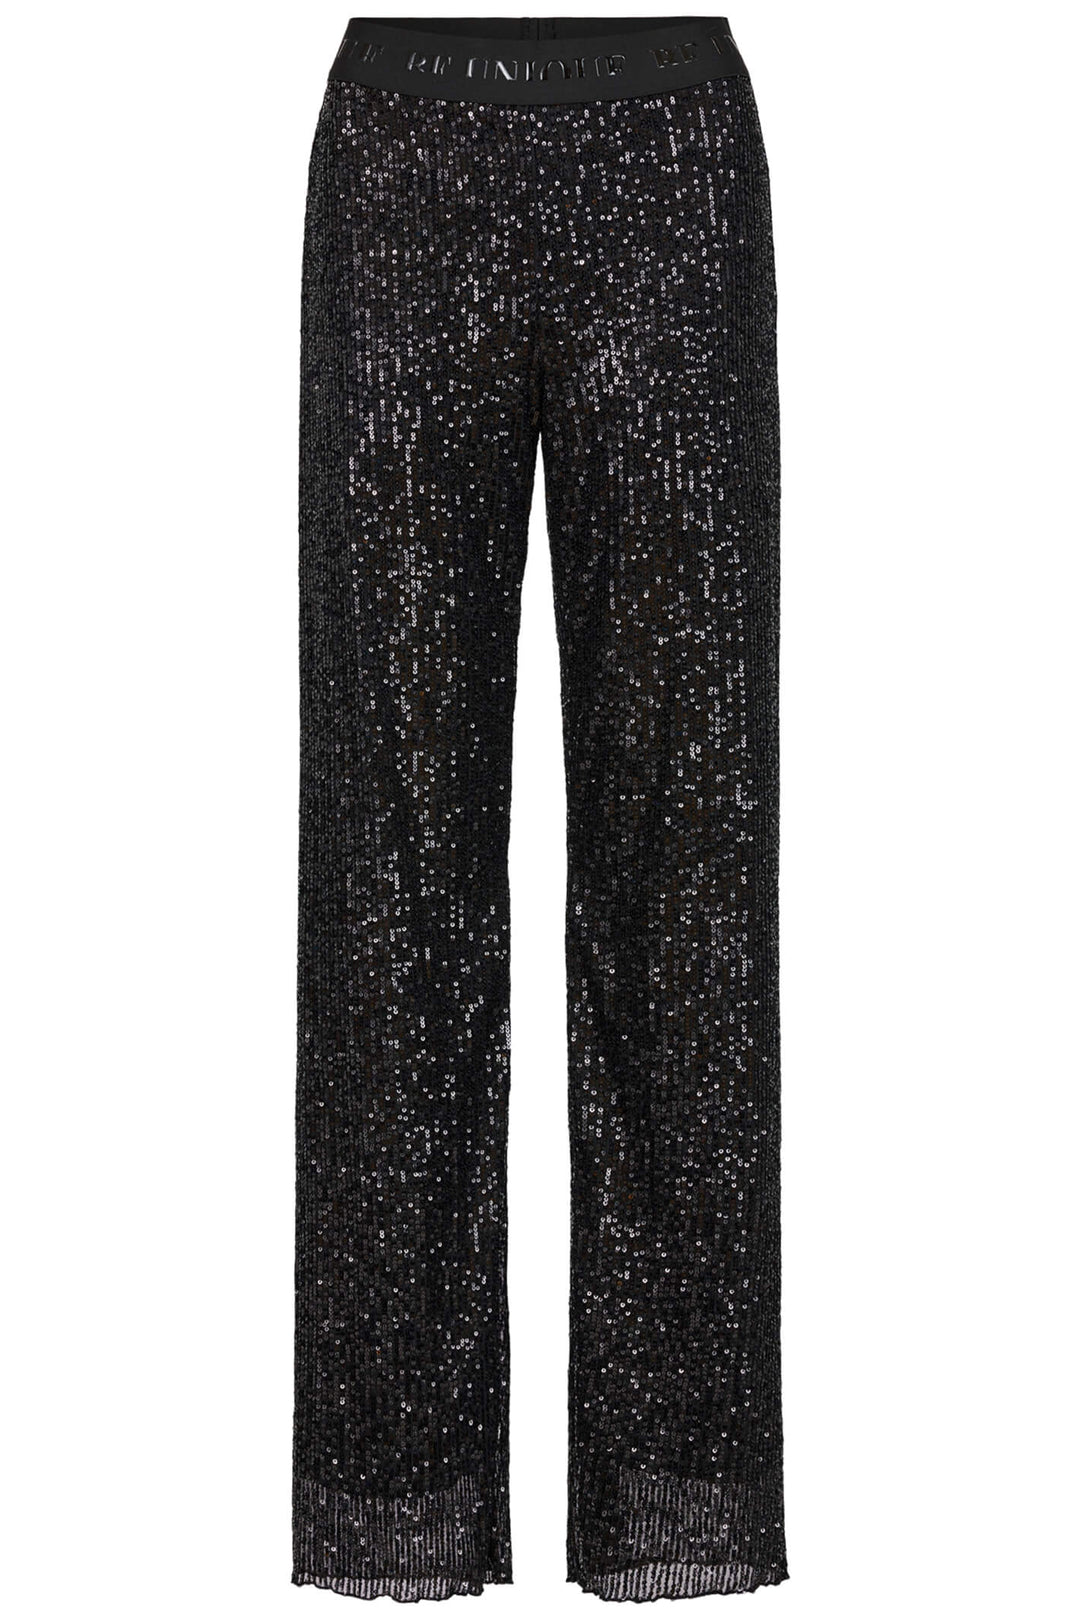 Robell 52608 90 Black Cindy Sequin Wide Leg Trousers - Experience Boutique